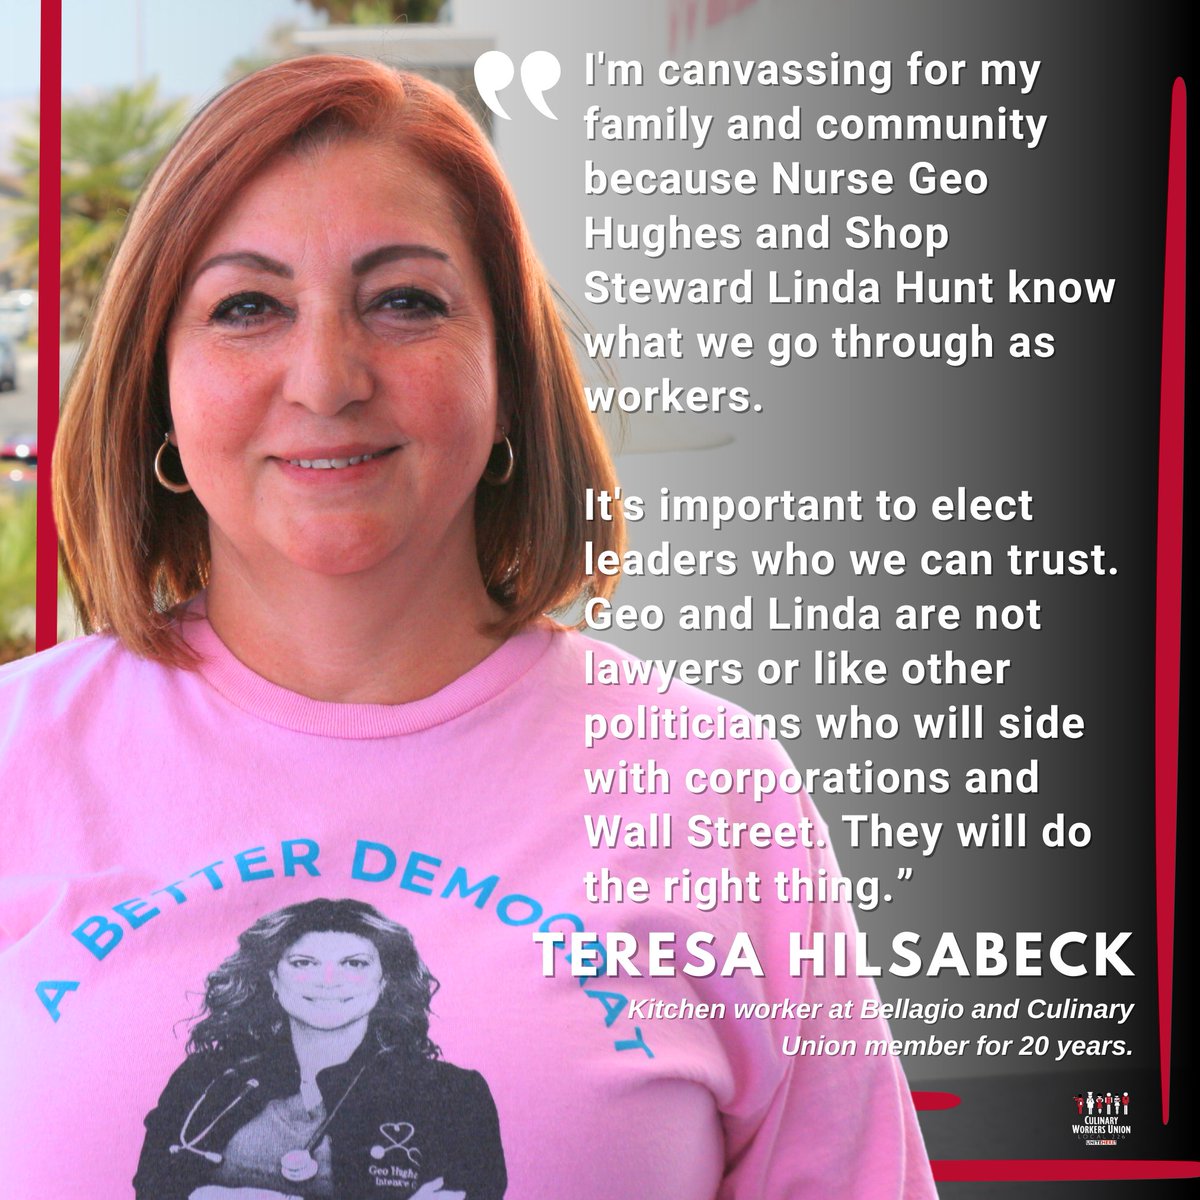 Meet Teresa, kitchen worker & Culinary Union member: 'It's important to elect leaders who we can trust. Nurse @GeoForNevada & @LindaForNevada are not lawyers or like other politicians who will side with corporations & Wall Street. They'll do the right thing.” #WeVoteWeWin